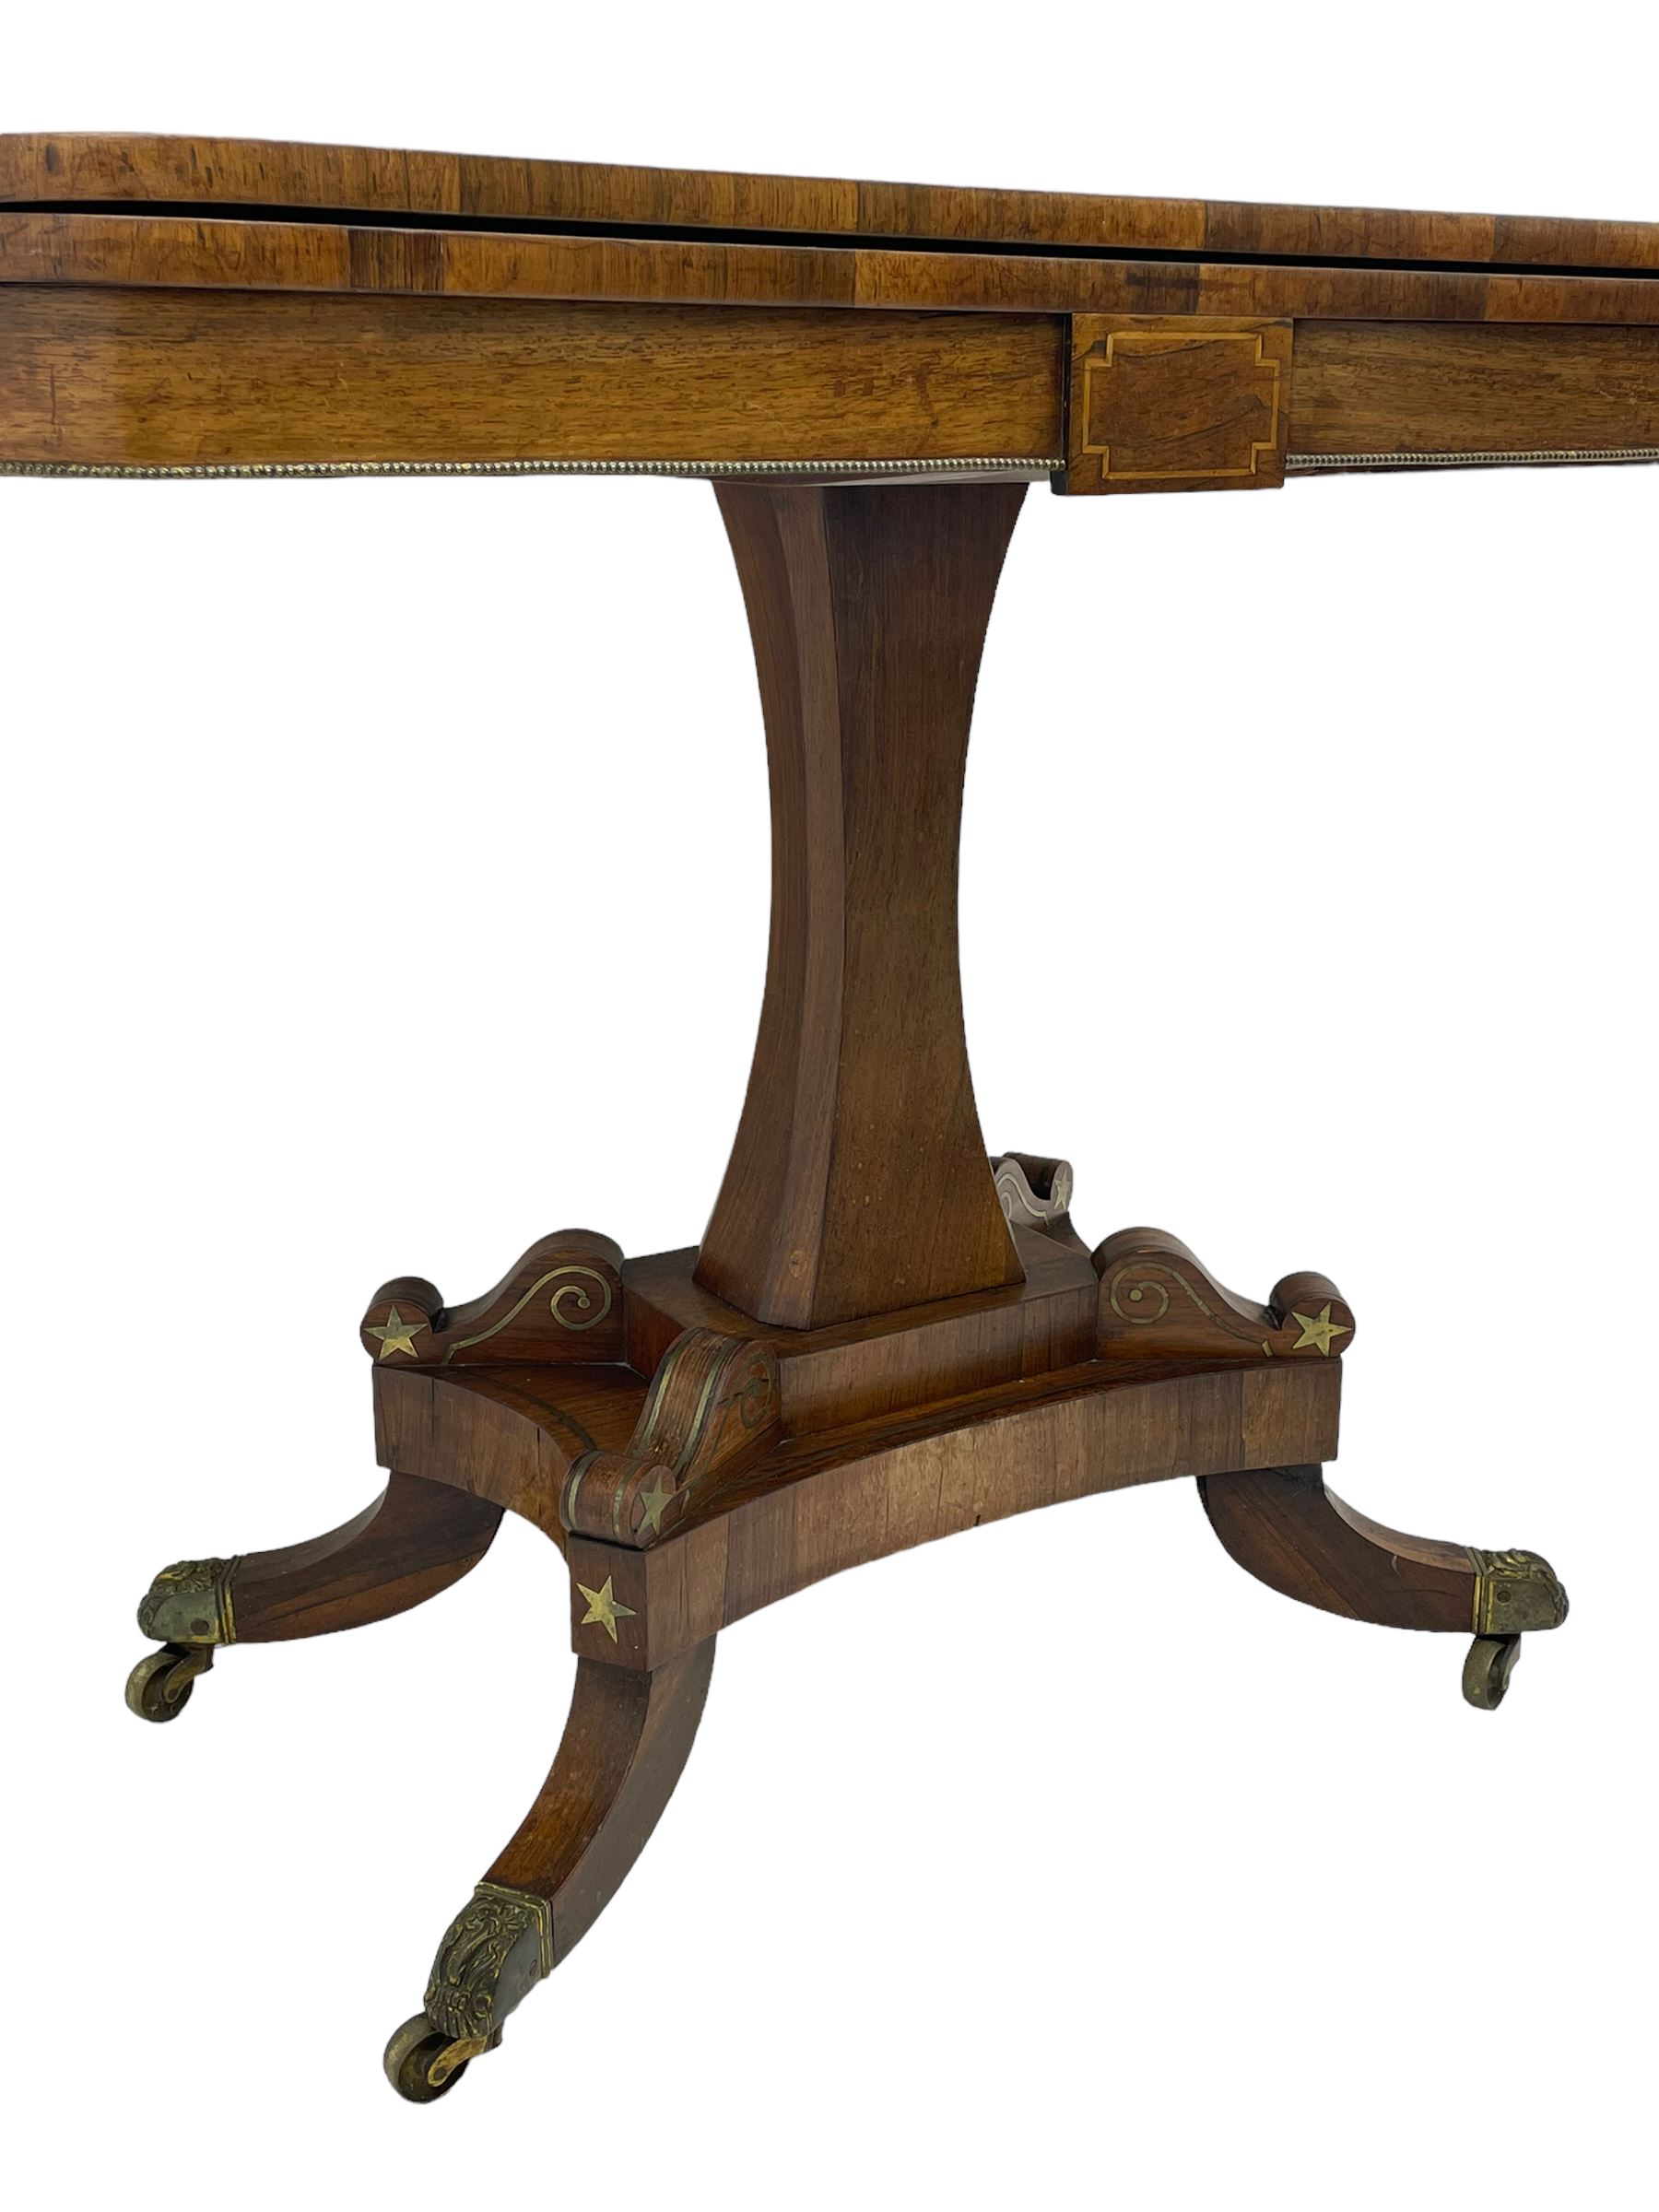 Regency rosewood and brass inlaid card table - Image 5 of 15